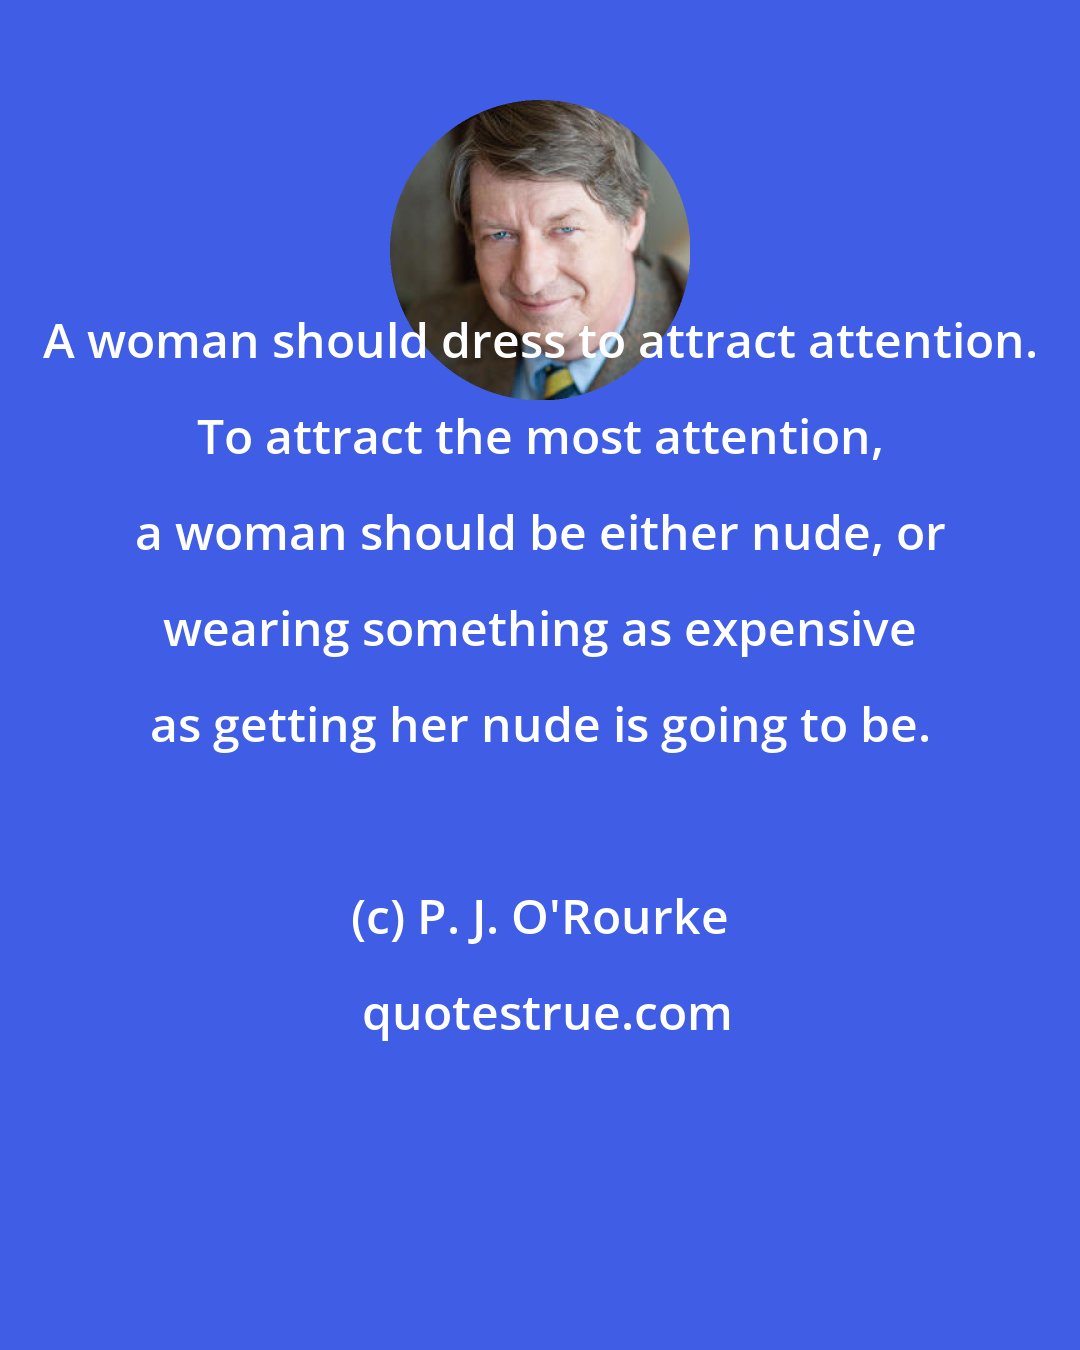 P. J. O'Rourke: A woman should dress to attract attention. To attract the most attention, a woman should be either nude, or wearing something as expensive as getting her nude is going to be.